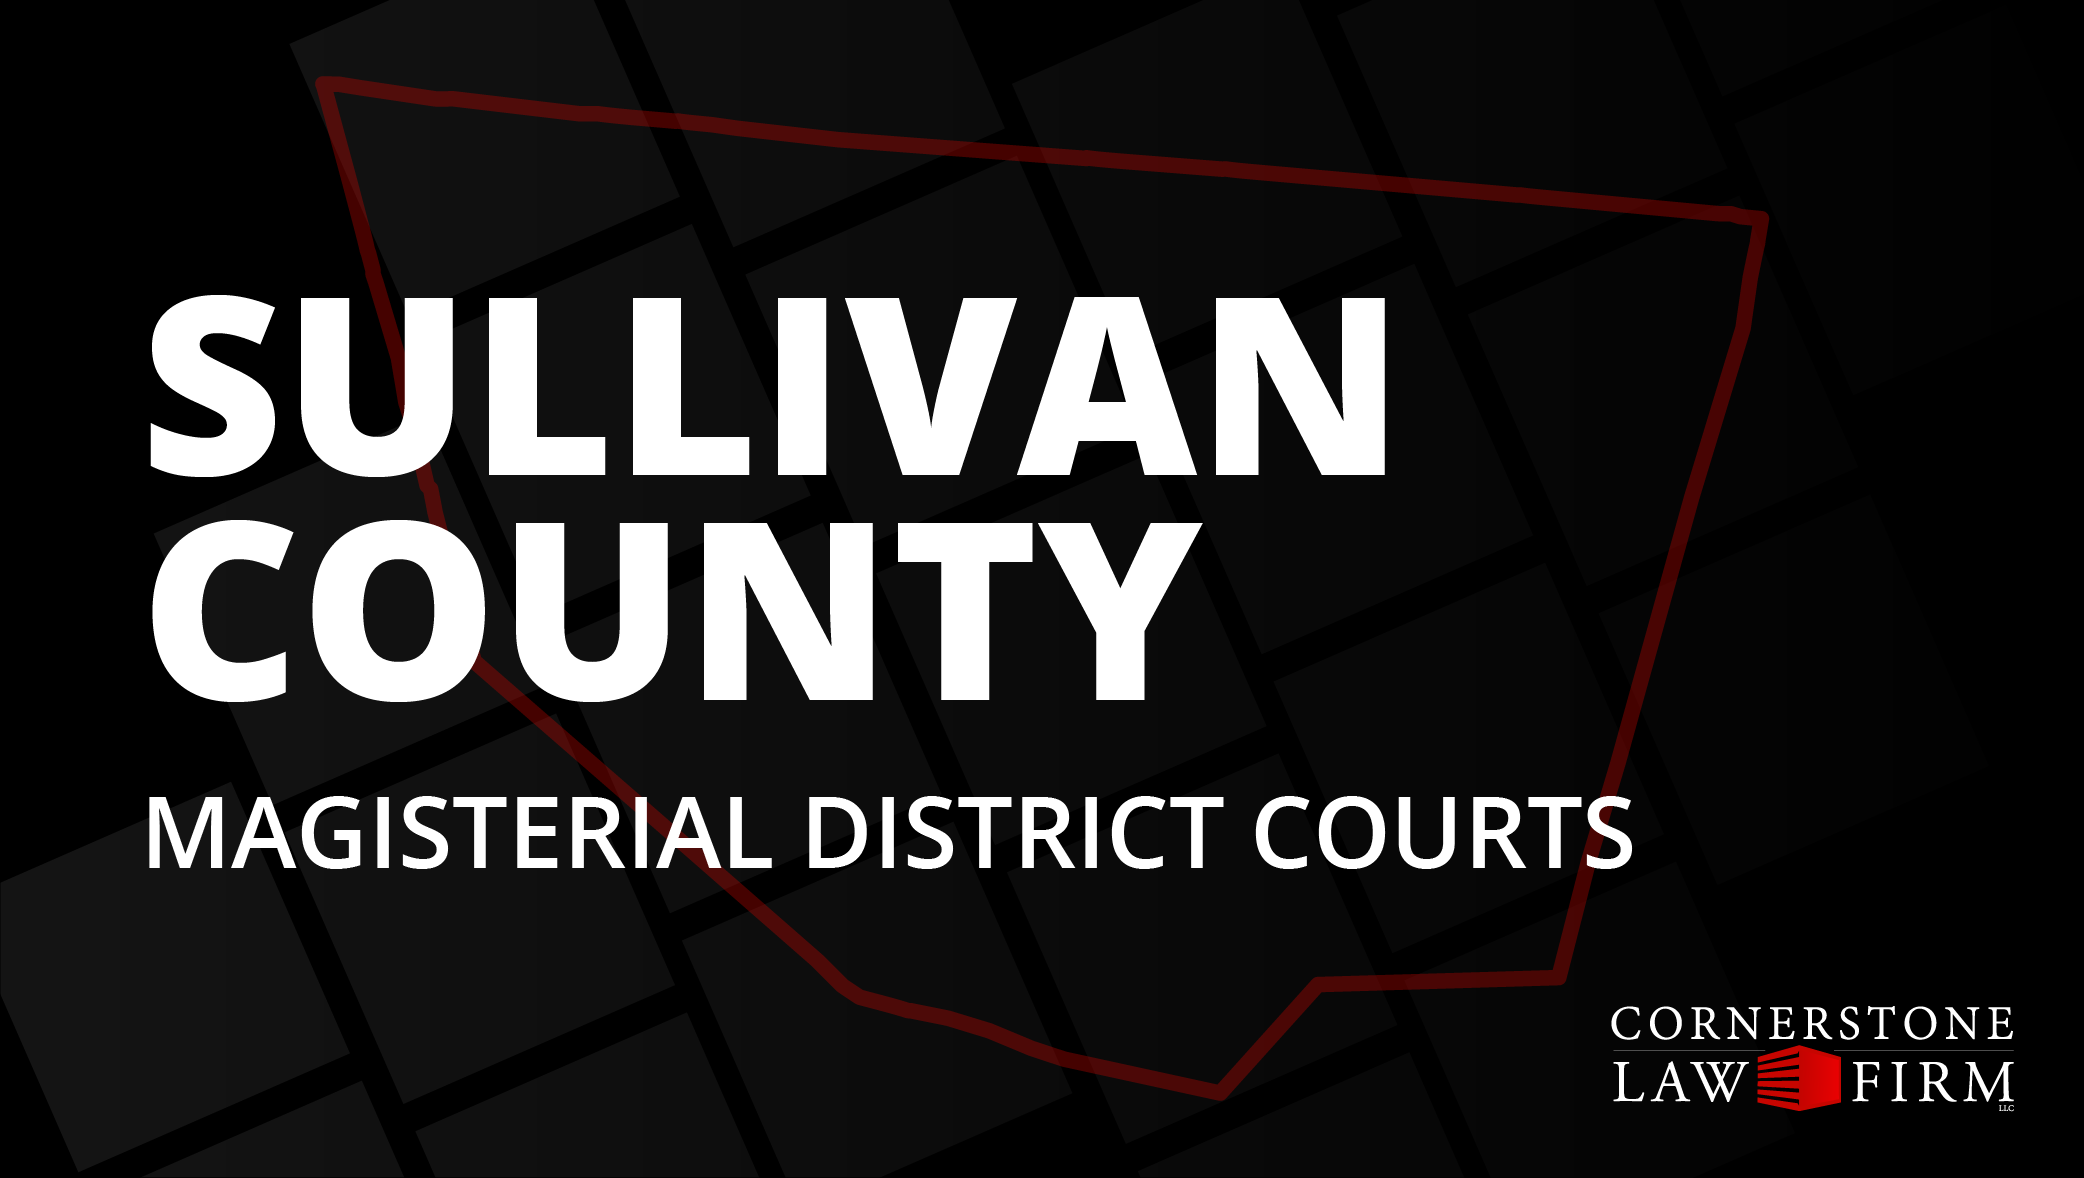 The words "Sullivan County Magisterial District Courts" over a black background with a faded red outline of the county.